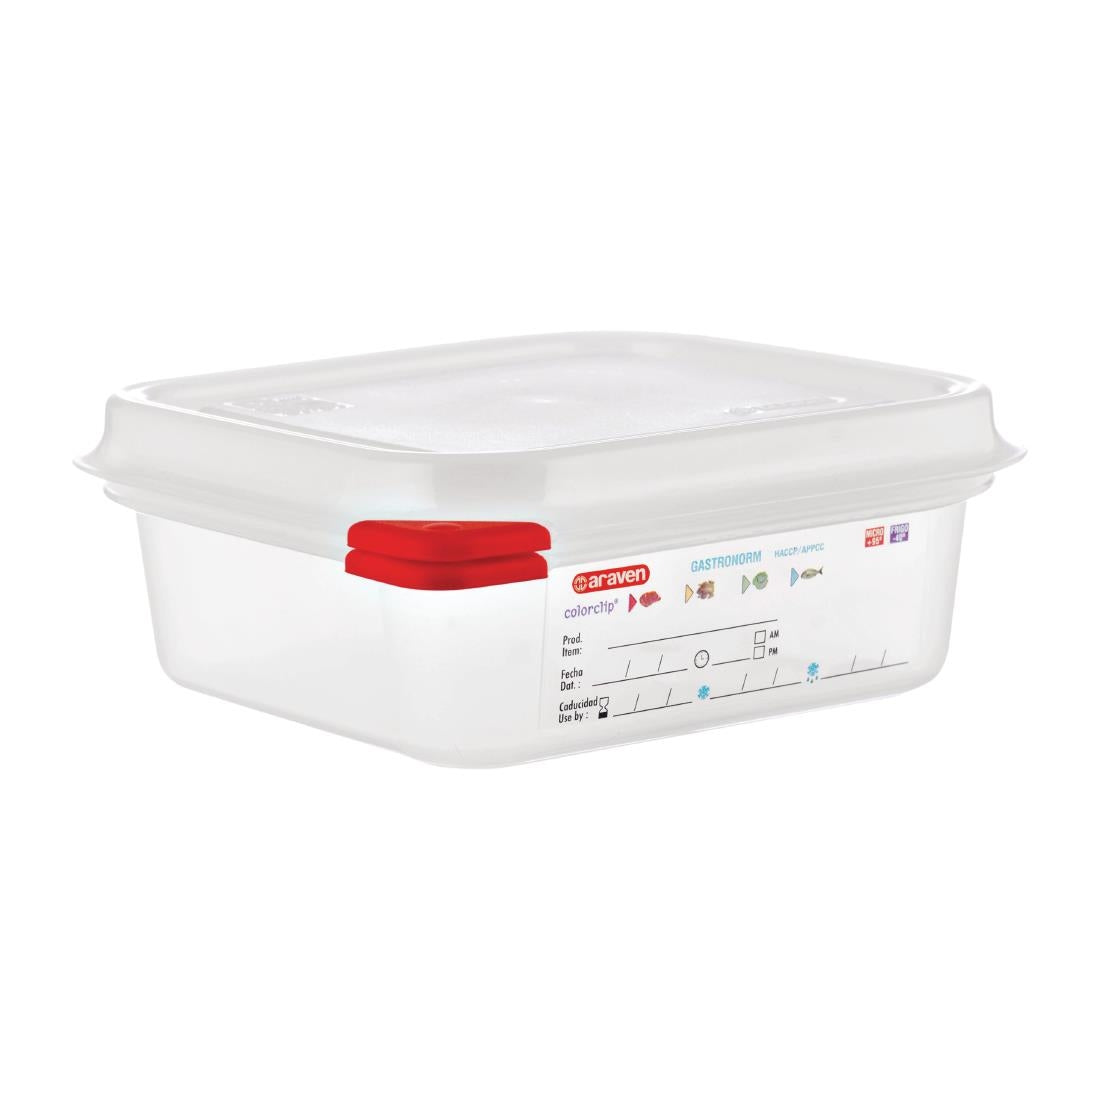 Araven Polypropylene 1/6 Gastronorm Food Storage Containers 1.1Ltr (Pack of 4) JD Catering Equipment Solutions Ltd